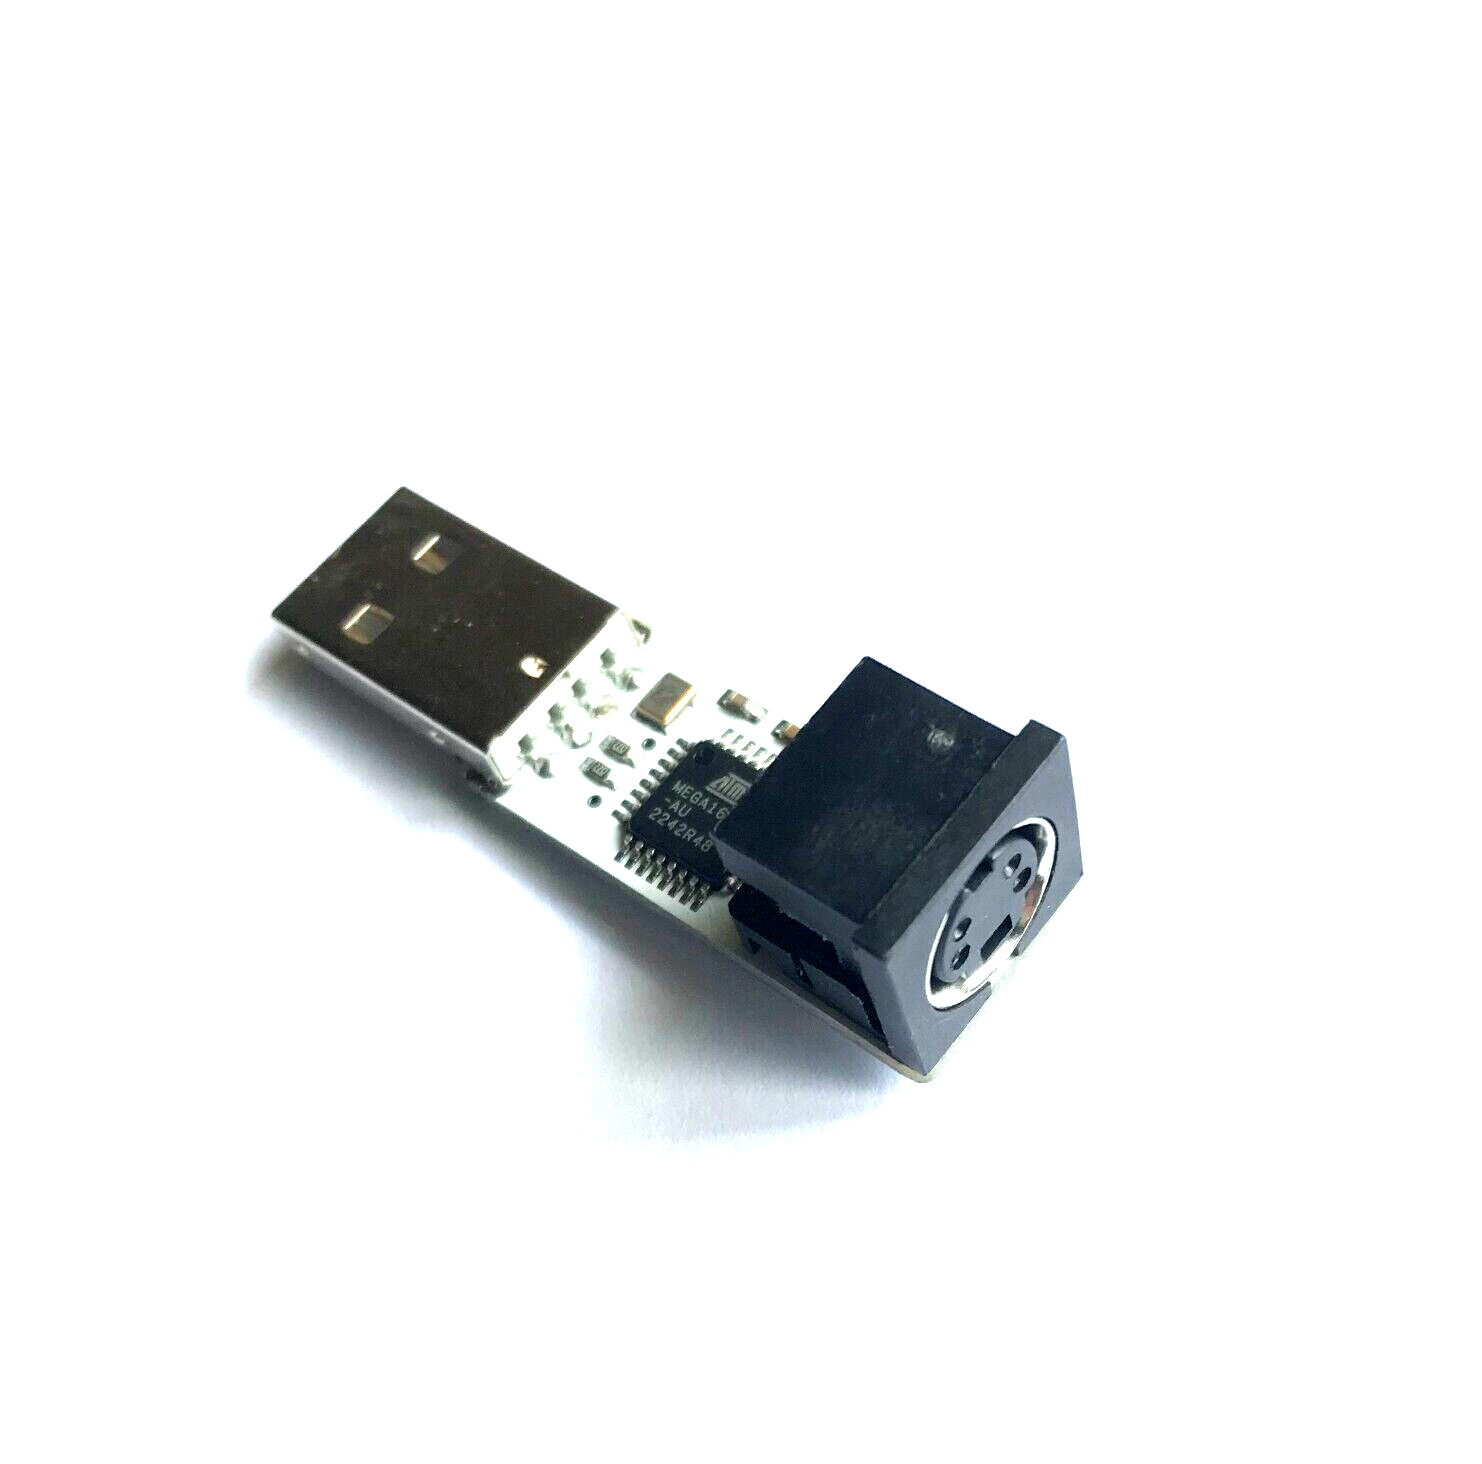 tinkerBOY ADB to USB Keyboard/Mouse Converter v2 Adapter for Apple ADB